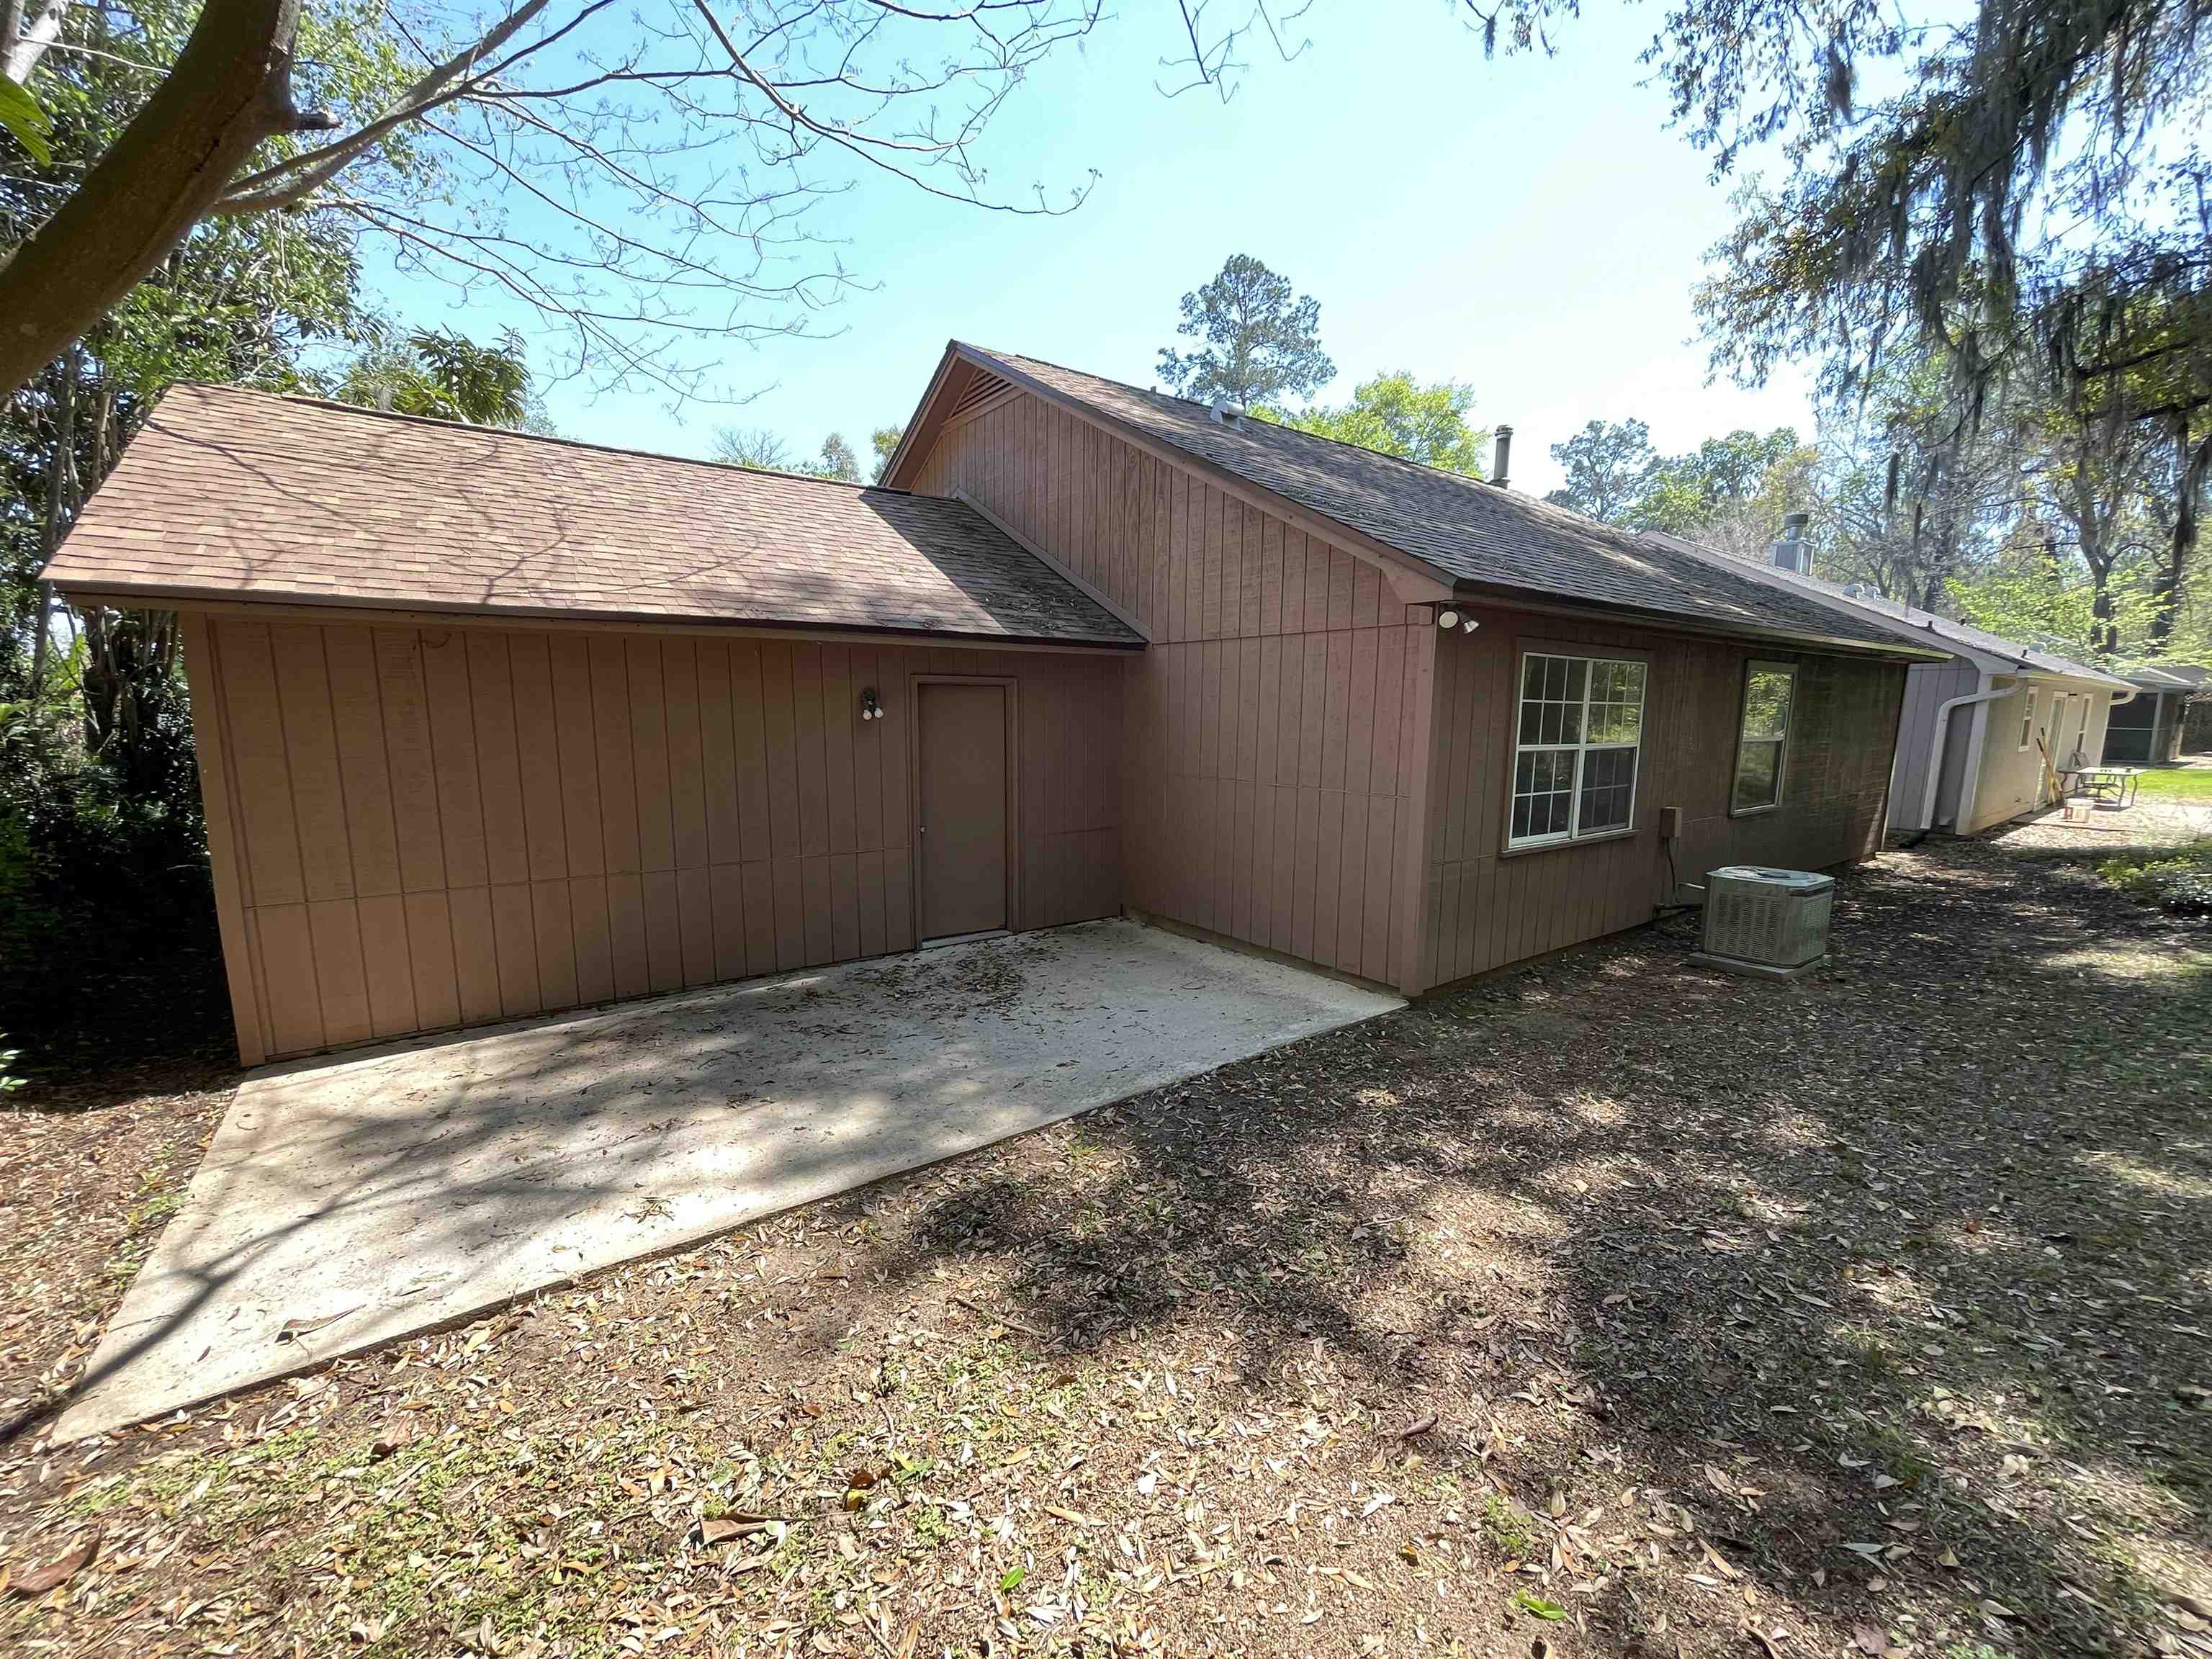 4094 Cottage Wood Trail,TALLAHASSEE,Florida 32311,3 Bedrooms Bedrooms,2 BathroomsBathrooms,Detached single family,4094 Cottage Wood Trail,369152